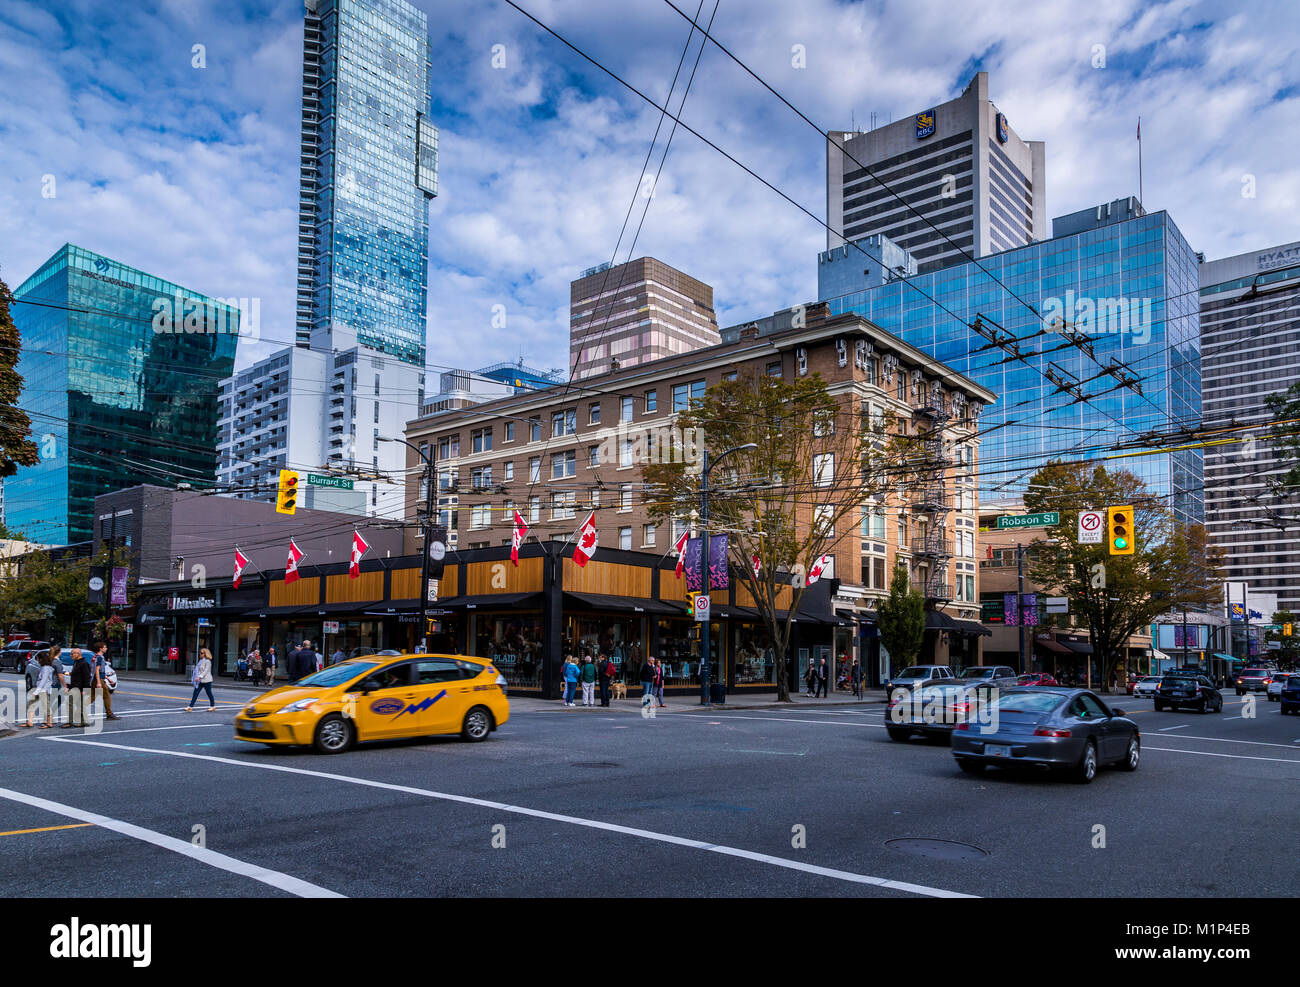 Robson Street Shopping Street In Downtown Vancouver British Columbia Canada  Stock Photo - Download Image Now - iStock